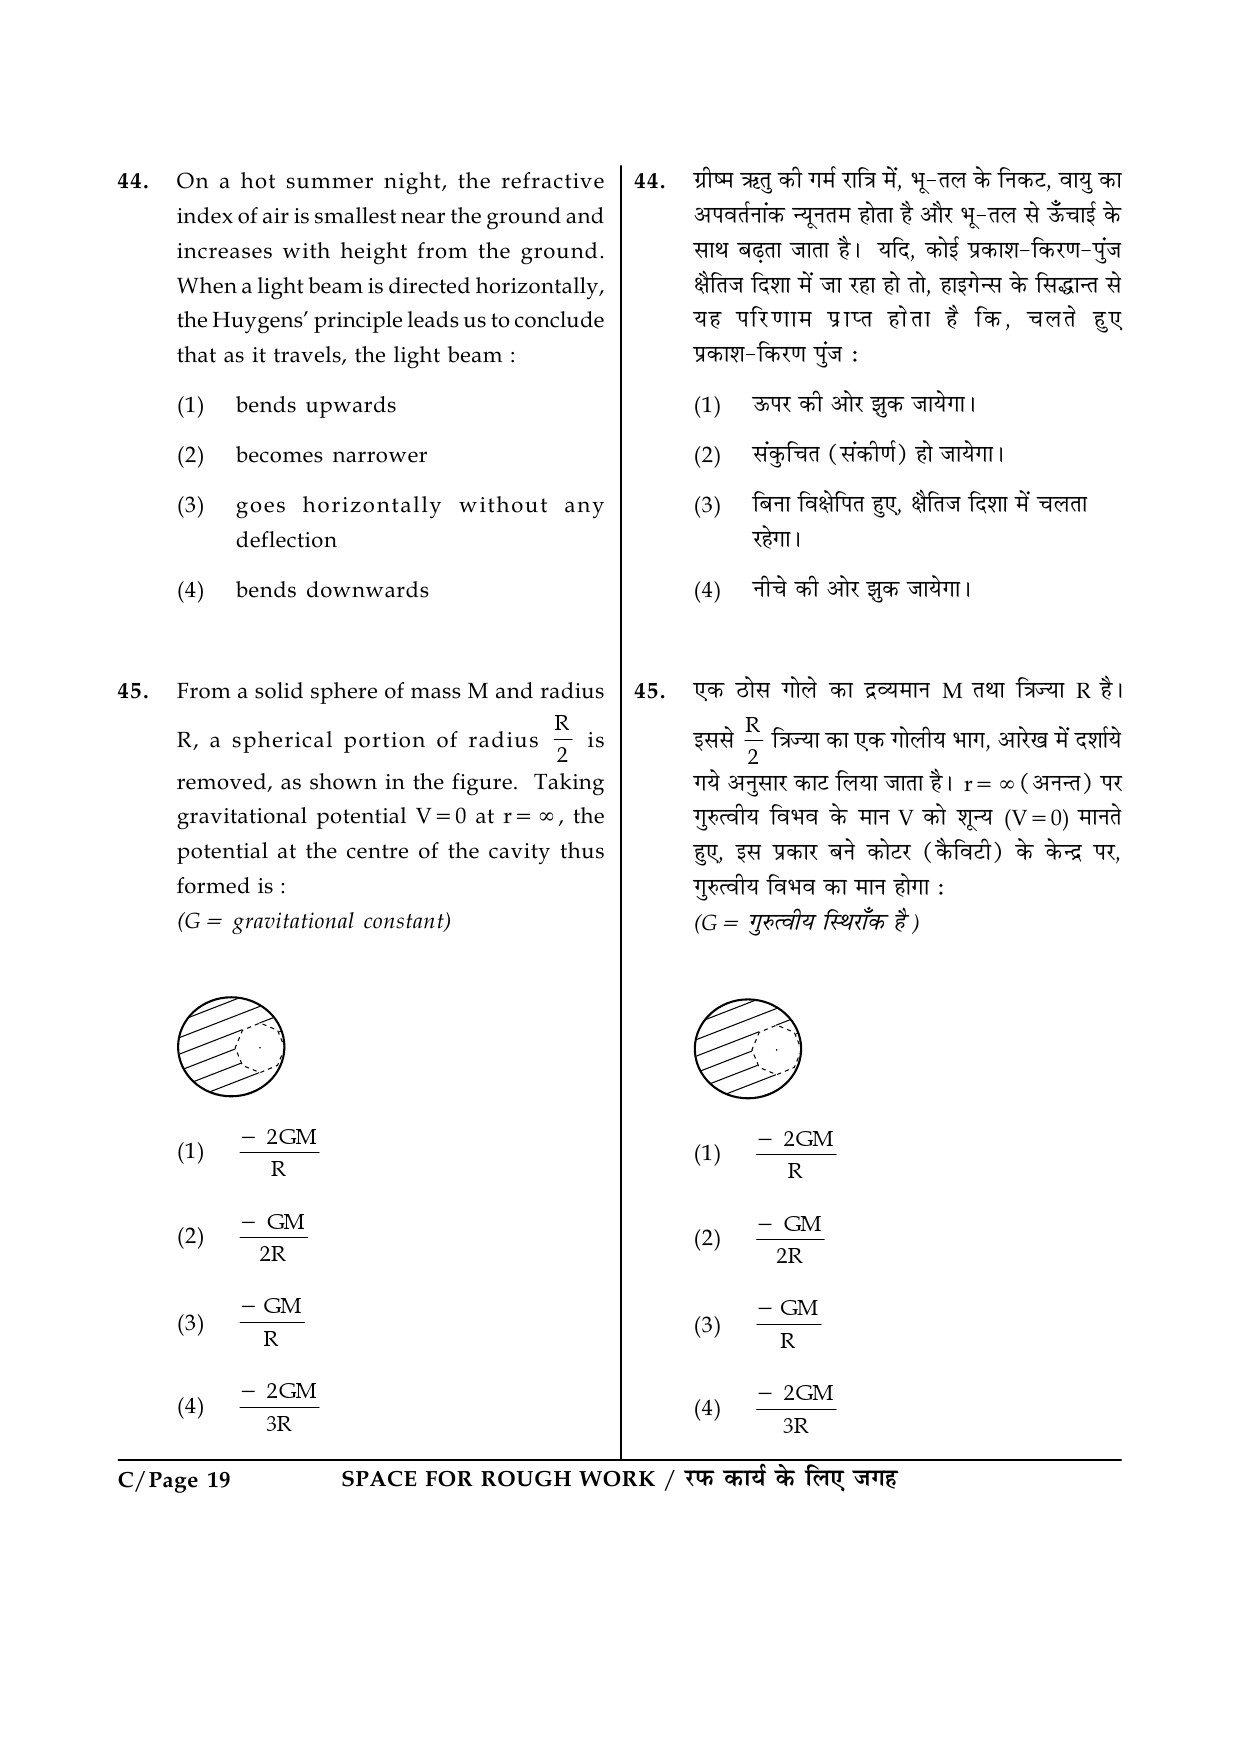 JEE Main Exam Question Paper 2015 Booklet C 19